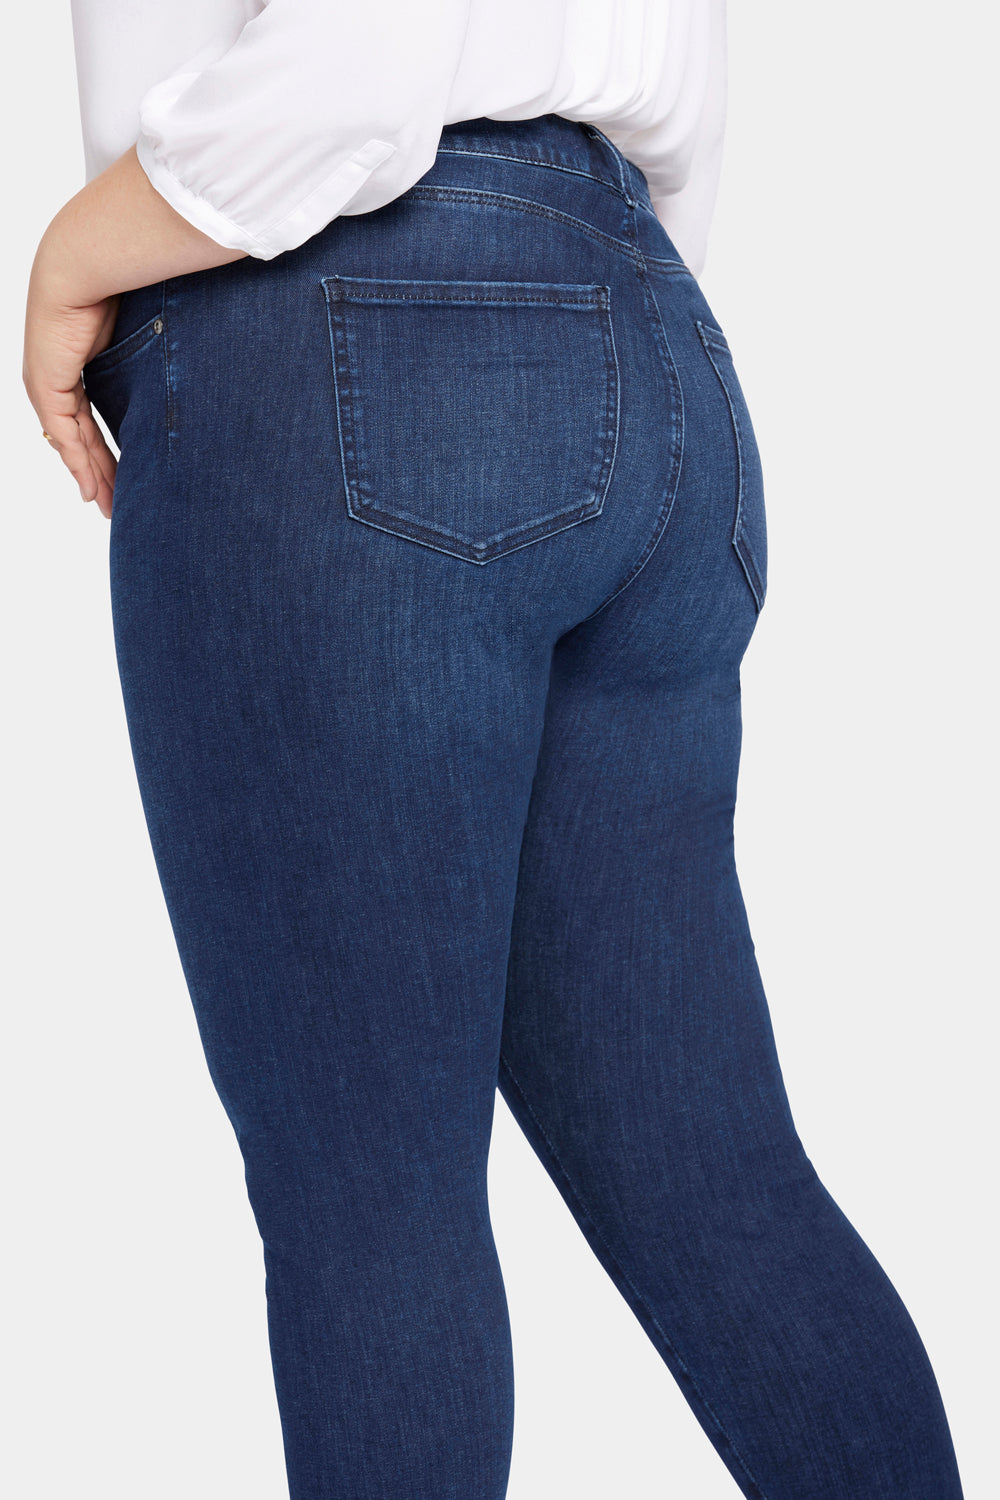 NYDJ Le Silhouette Ami Skinny Jeans In Petite Plus Size With High Rise - Marvelous